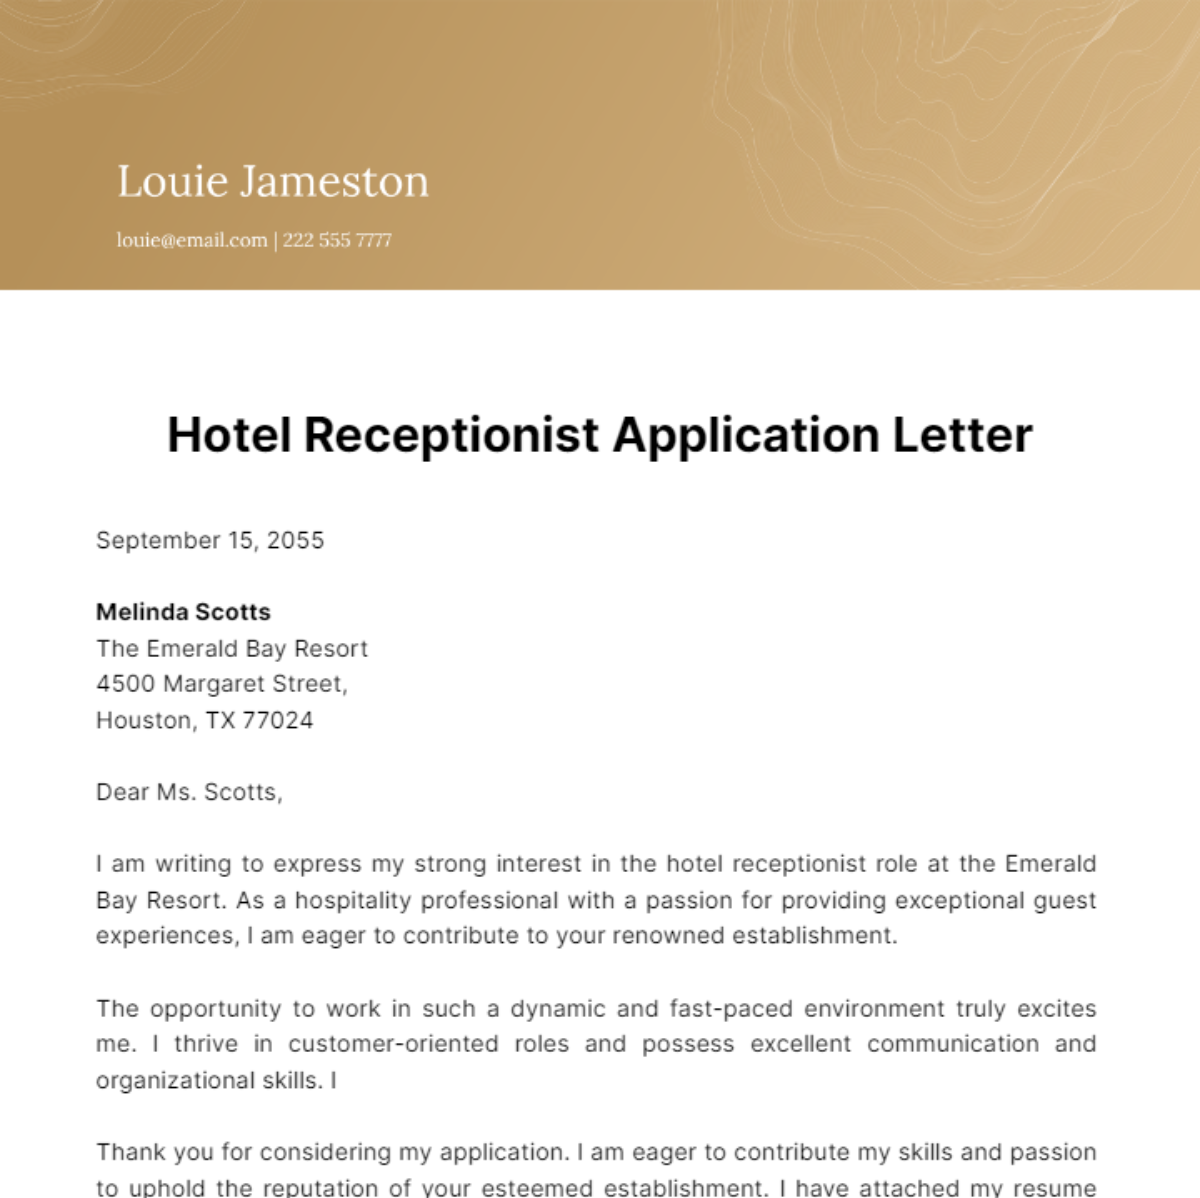 Hotel Receptionist Application Letter Template